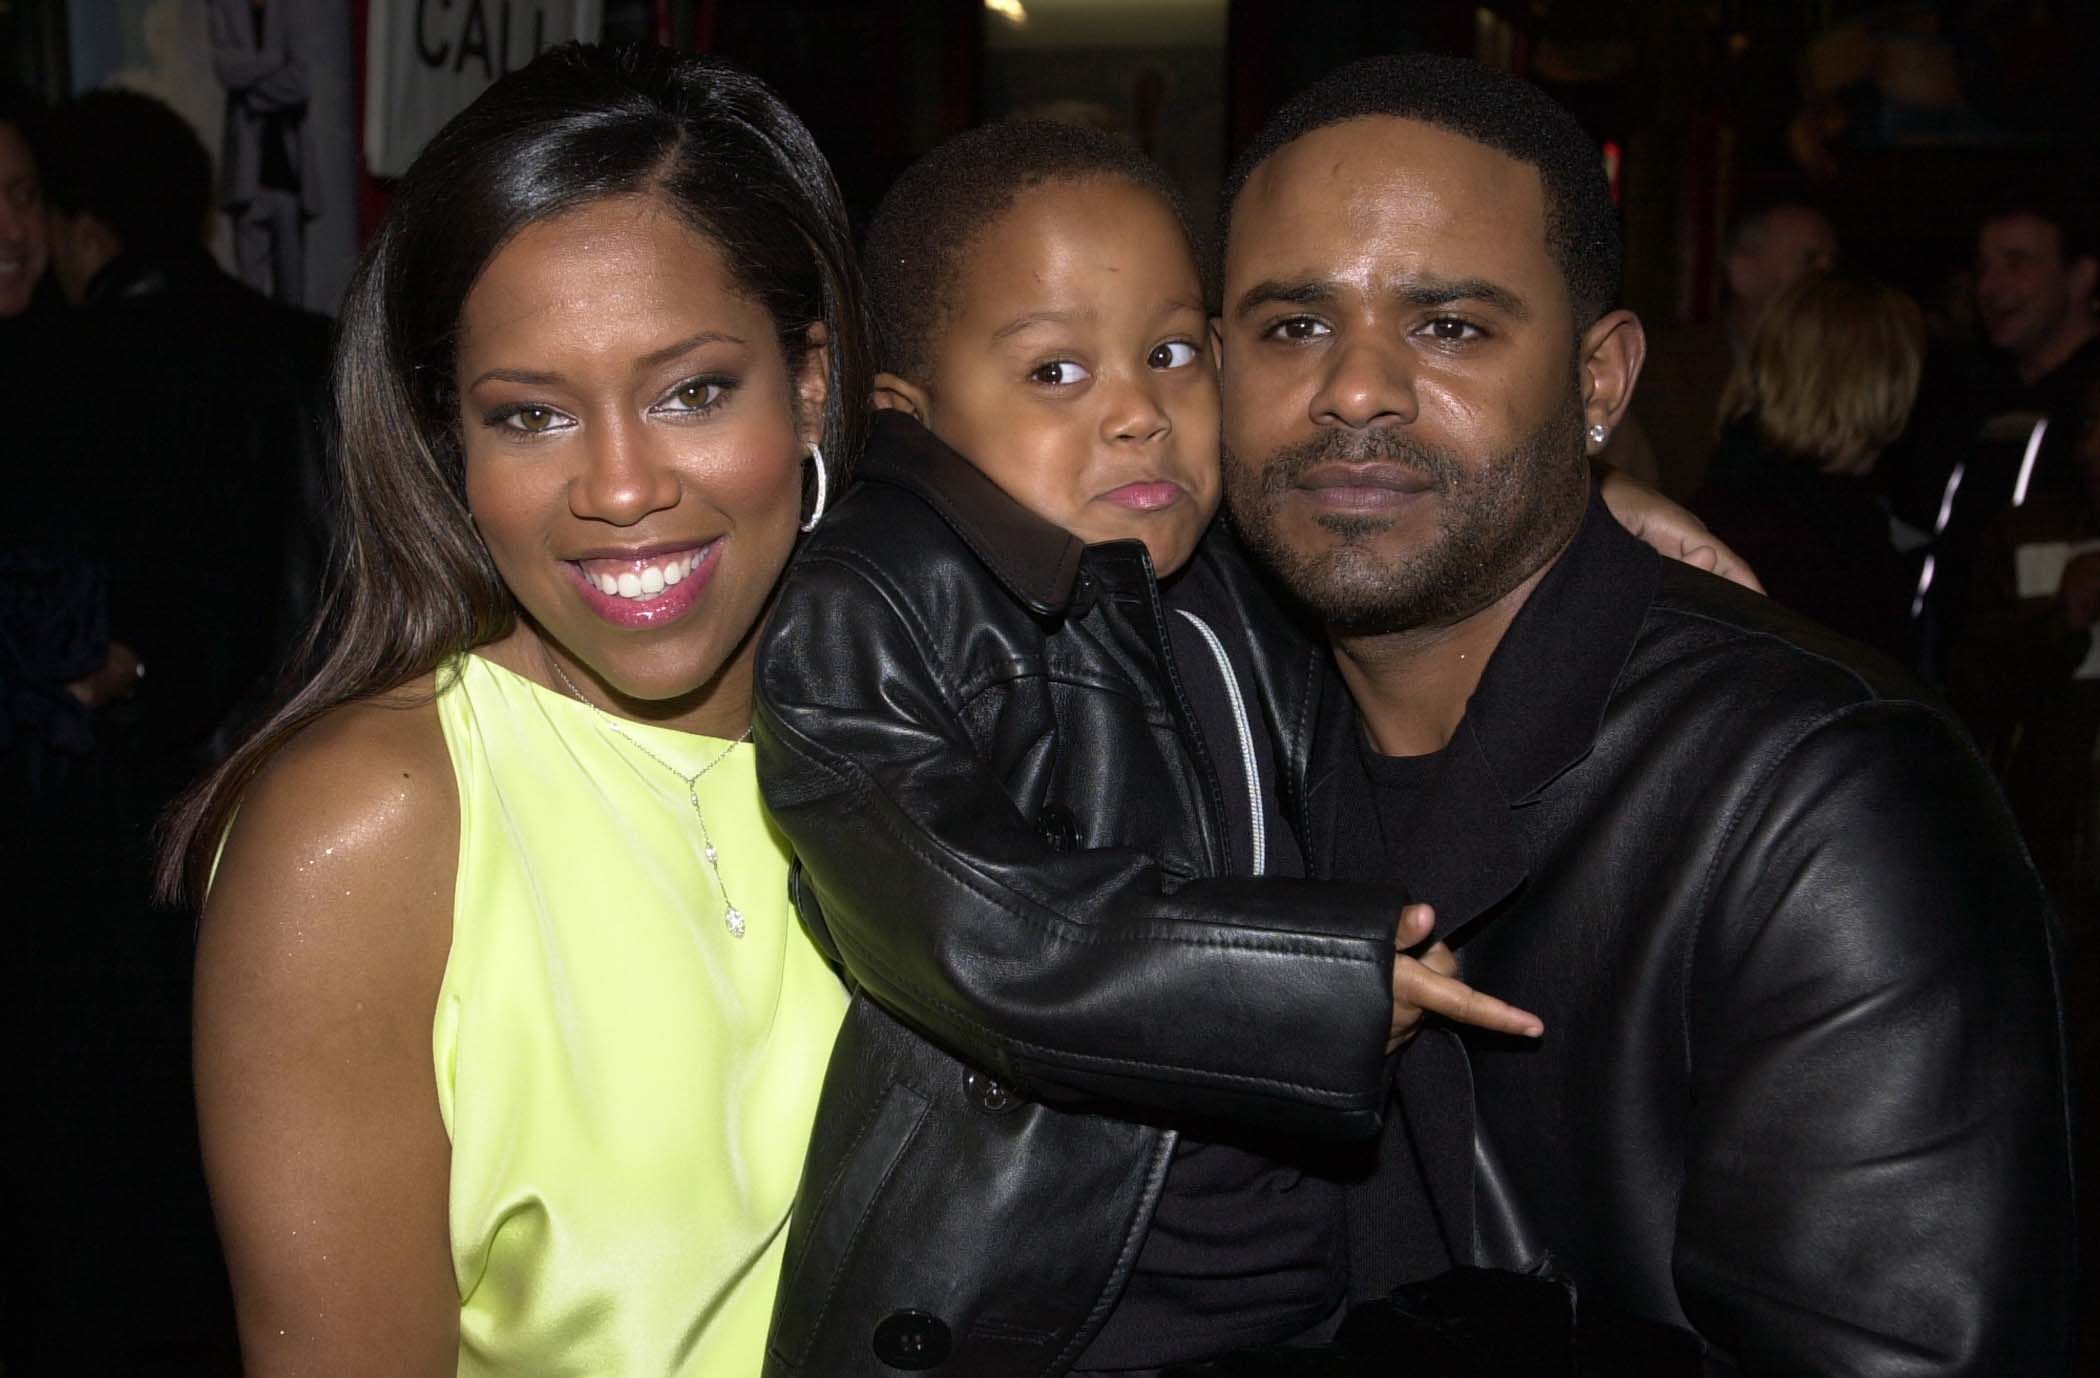 Regina King, Ian Alexander Jr., and Ian Alexander Sr., at the premiere of "Down to Earth" in 2001 | Source: Getty Images